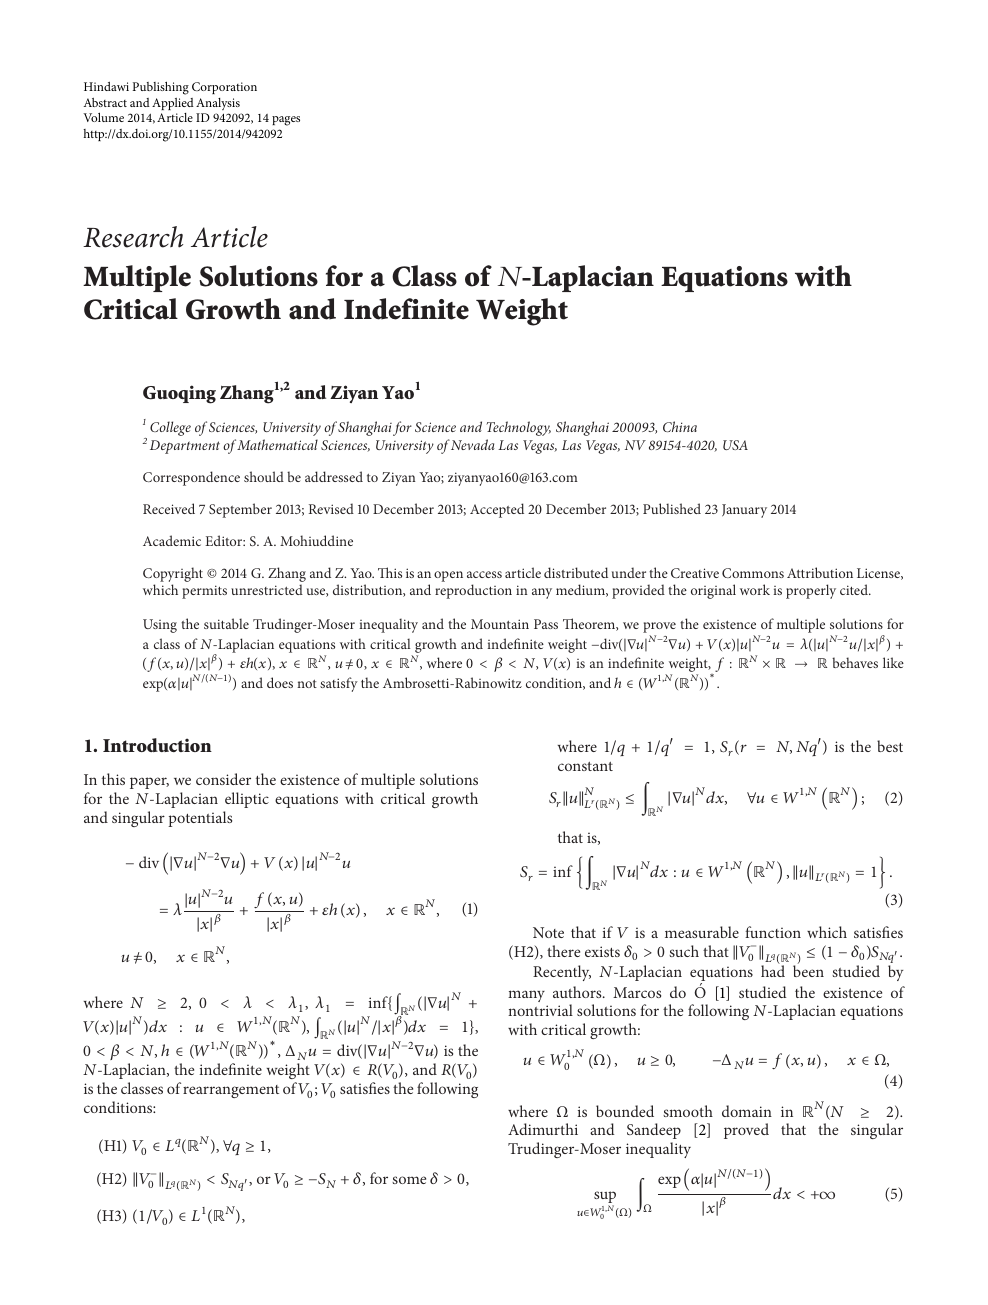 Multiple Solutions For A Class Of Laplacian Equations With Critical Growth And Indefinite Weight Topic Of Research Paper In Mathematics Download Scholarly Article Pdf And Read For Free On Cyberleninka Open